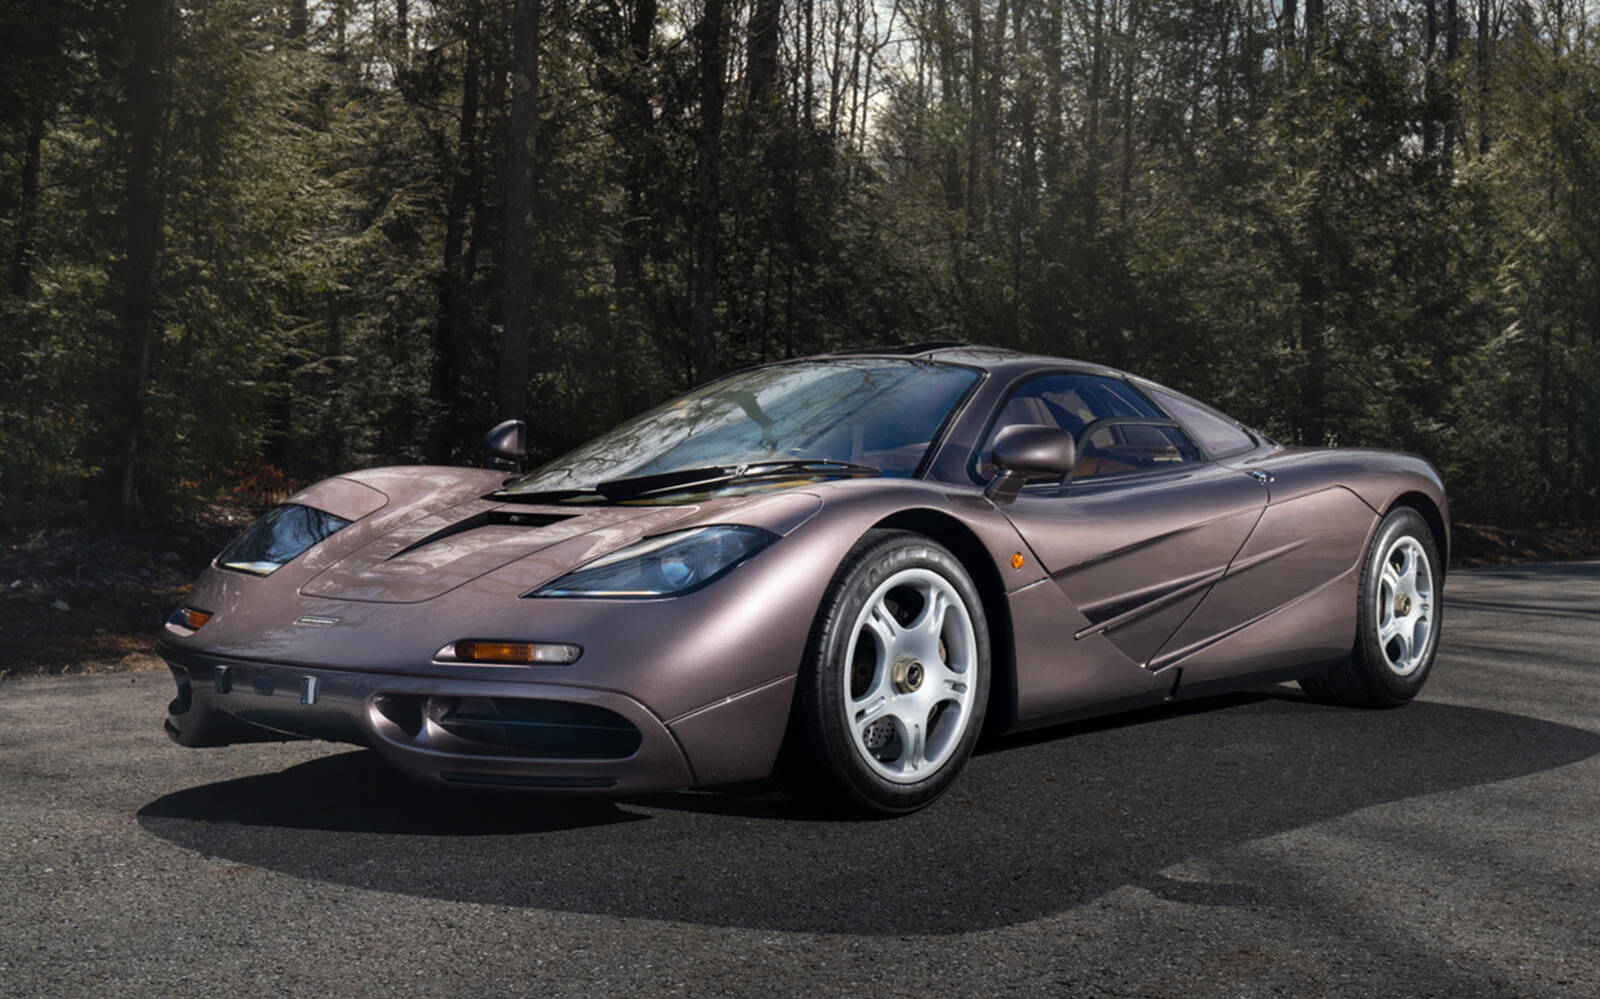 Like-New” 1995 McLaren F1 Fetches $25 Million at Auction - The Car